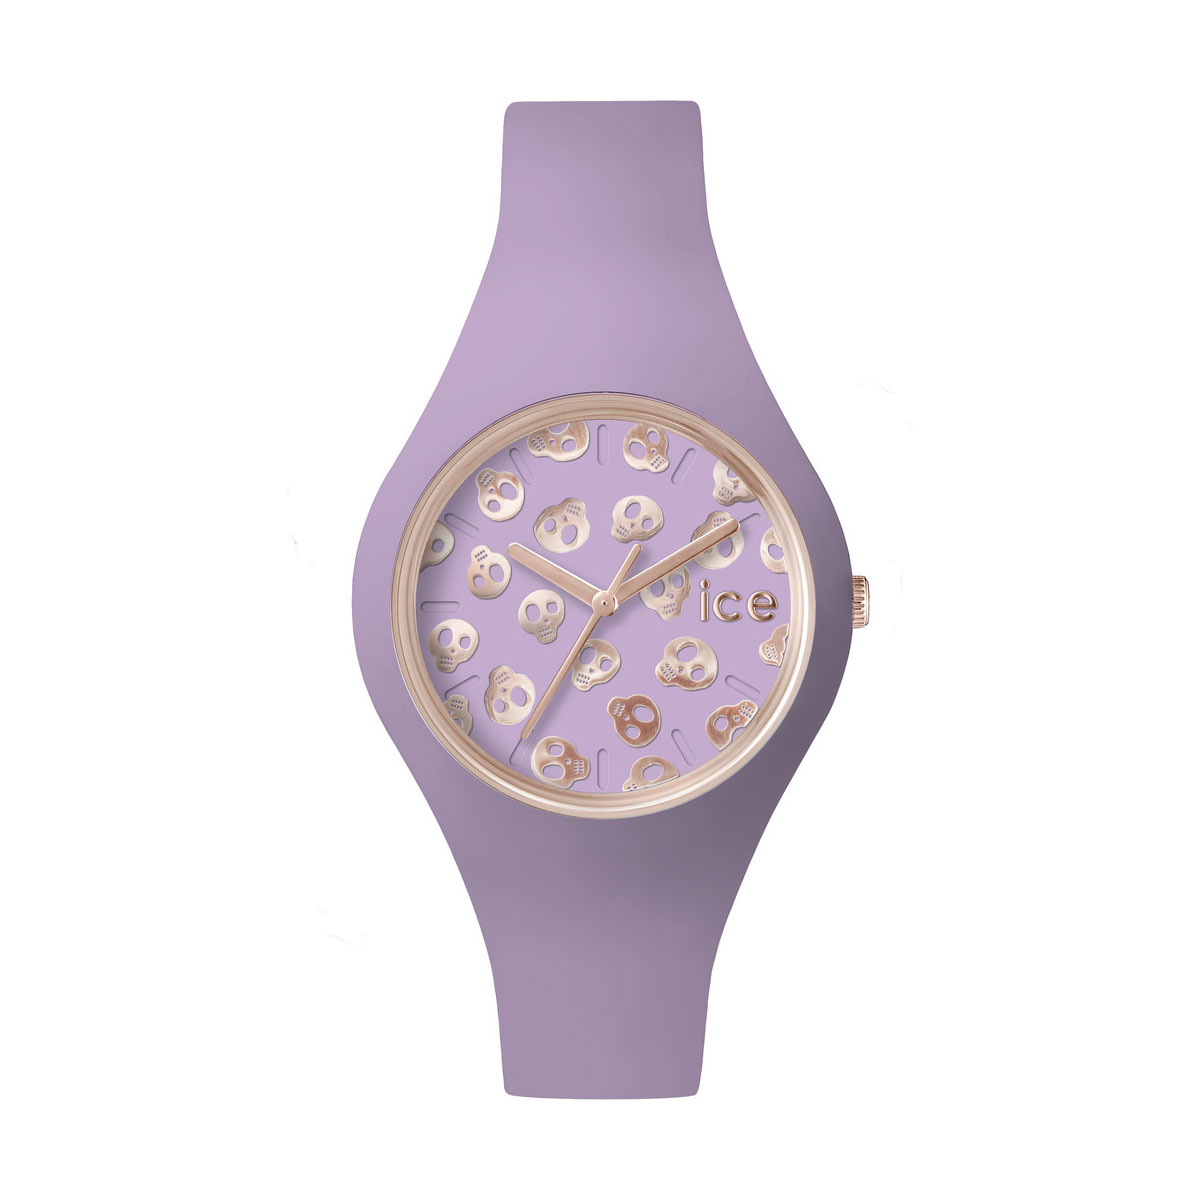 Ice Watch ICE Forever Unisex Model 000127 Watch